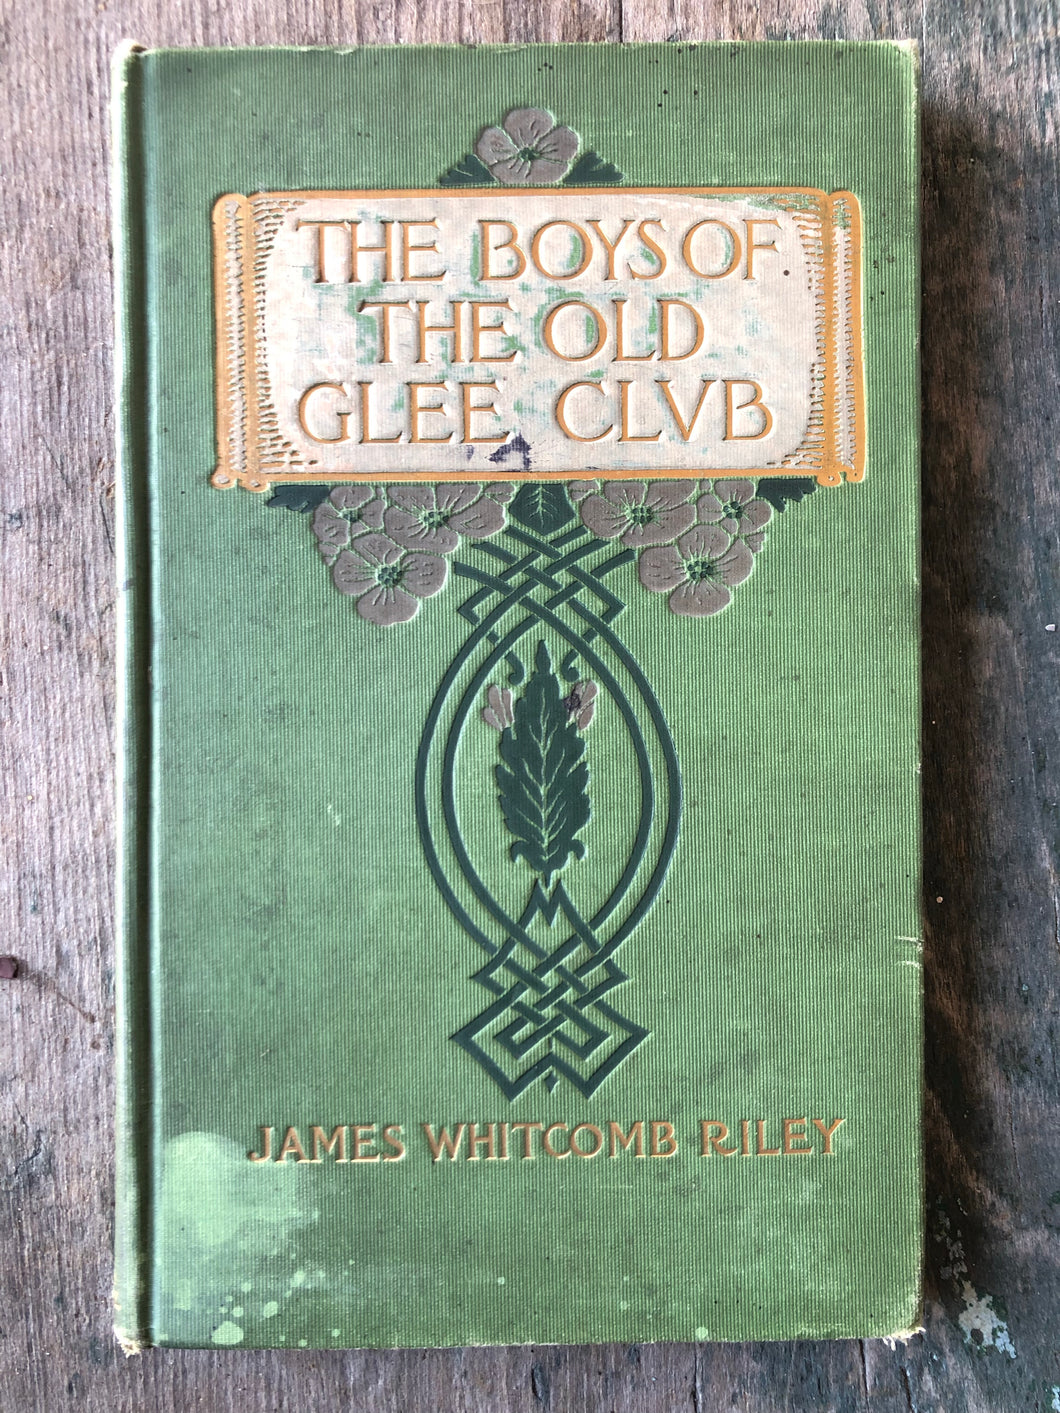 The Boys of the Old Glee Club. By james Whitcomb Riley